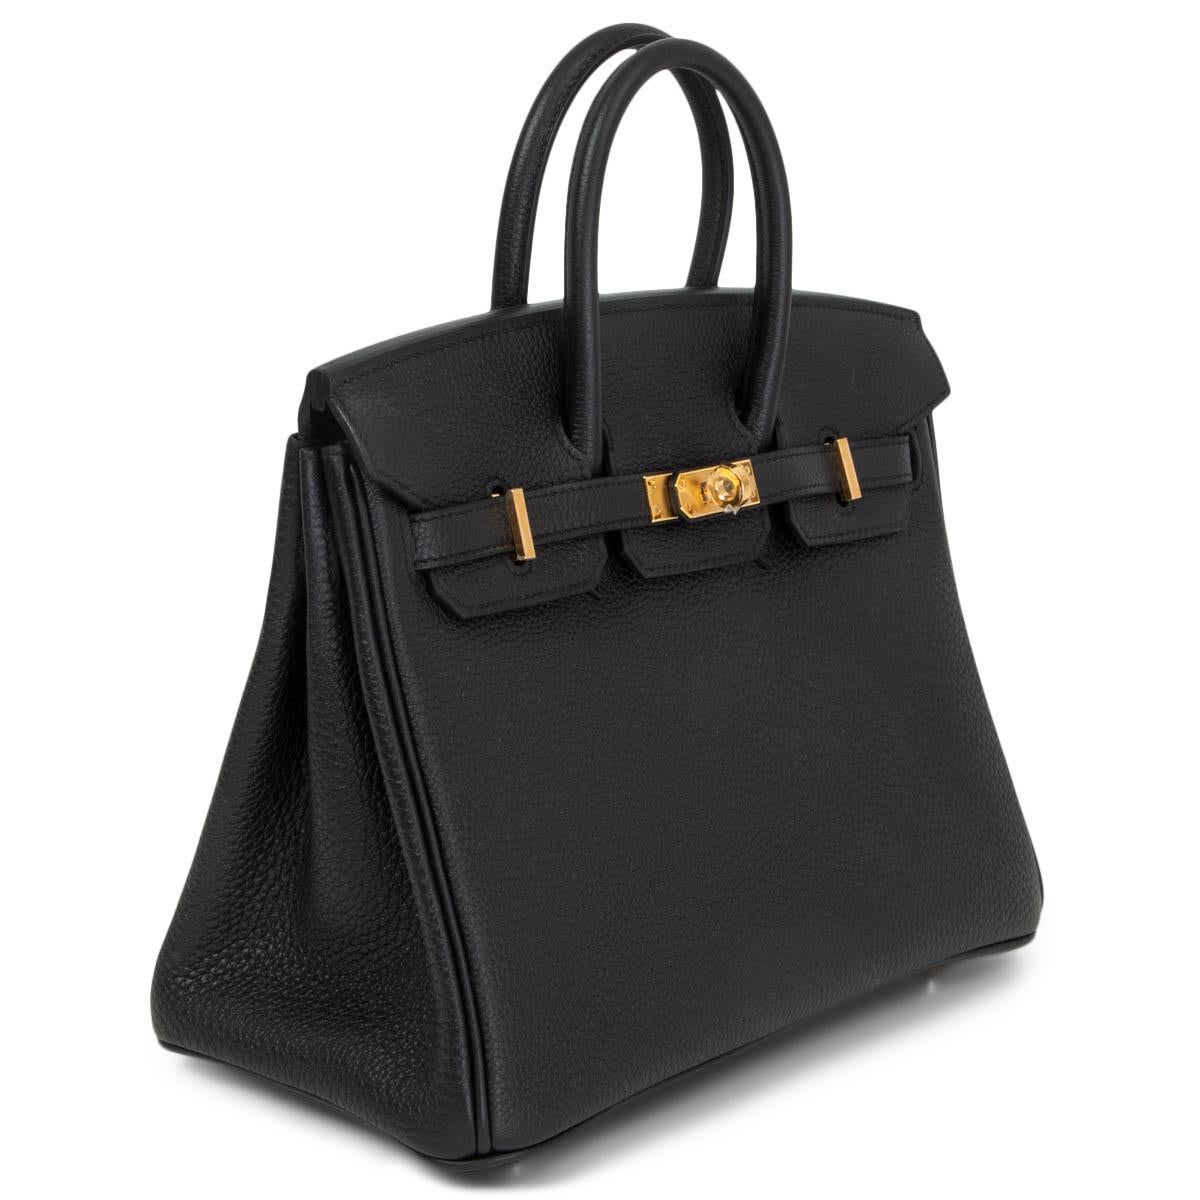 100% authentic Hermès Birkin 25 bag in Noir (black) Taurillon Clemence leather with gold-plated hardware. Lined in Chevre (goat skin) with an open pocket against the front and a zipper pocket against the back. Brand new. Comes with keys, lock,